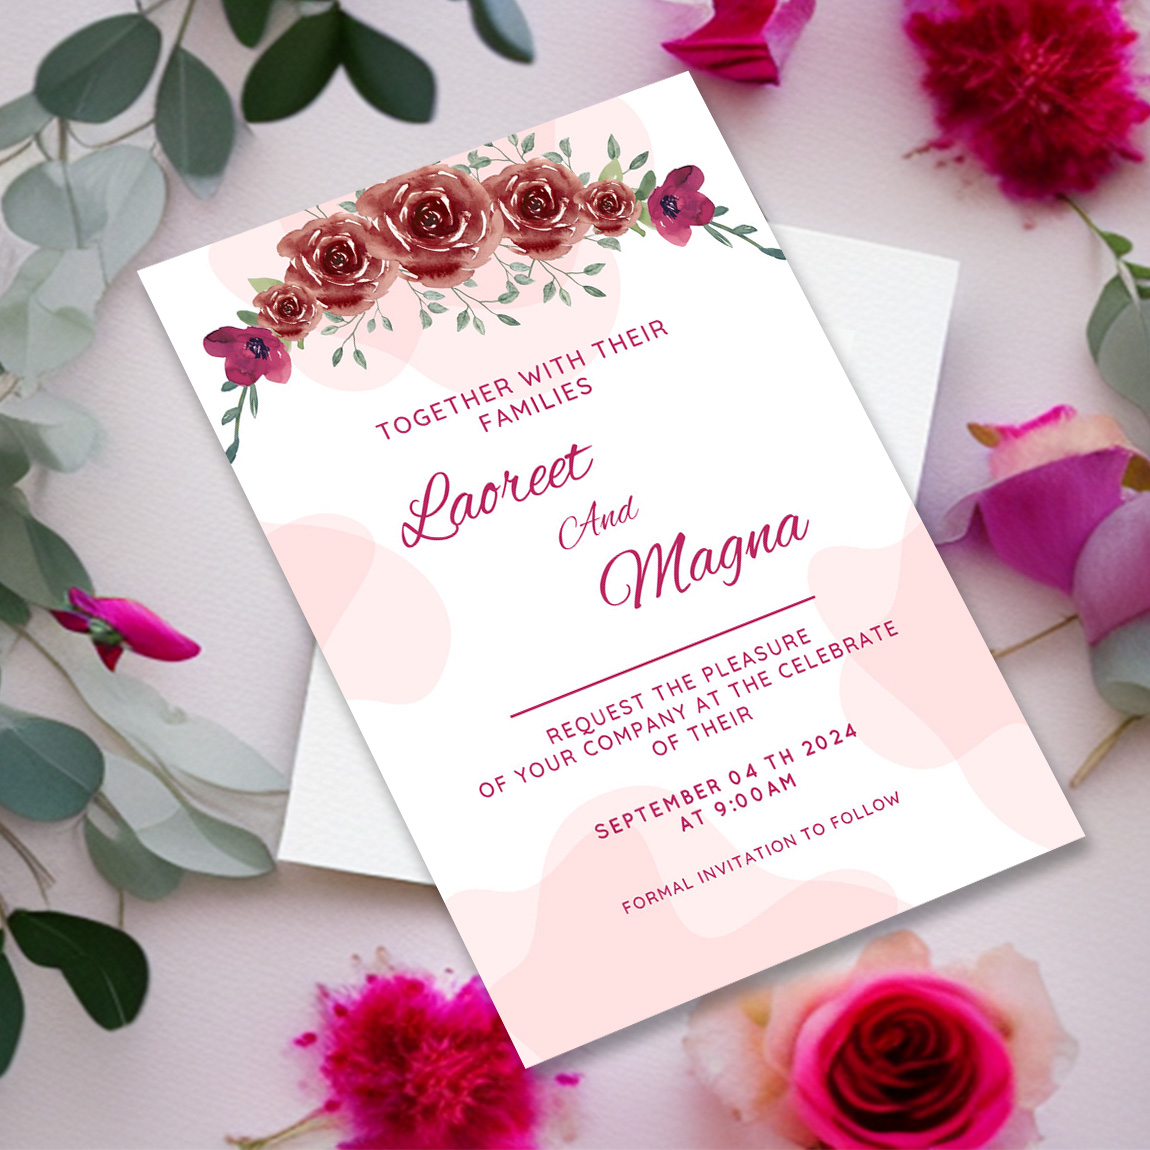 Image of amazing wedding invitation with brown roses and leaves.